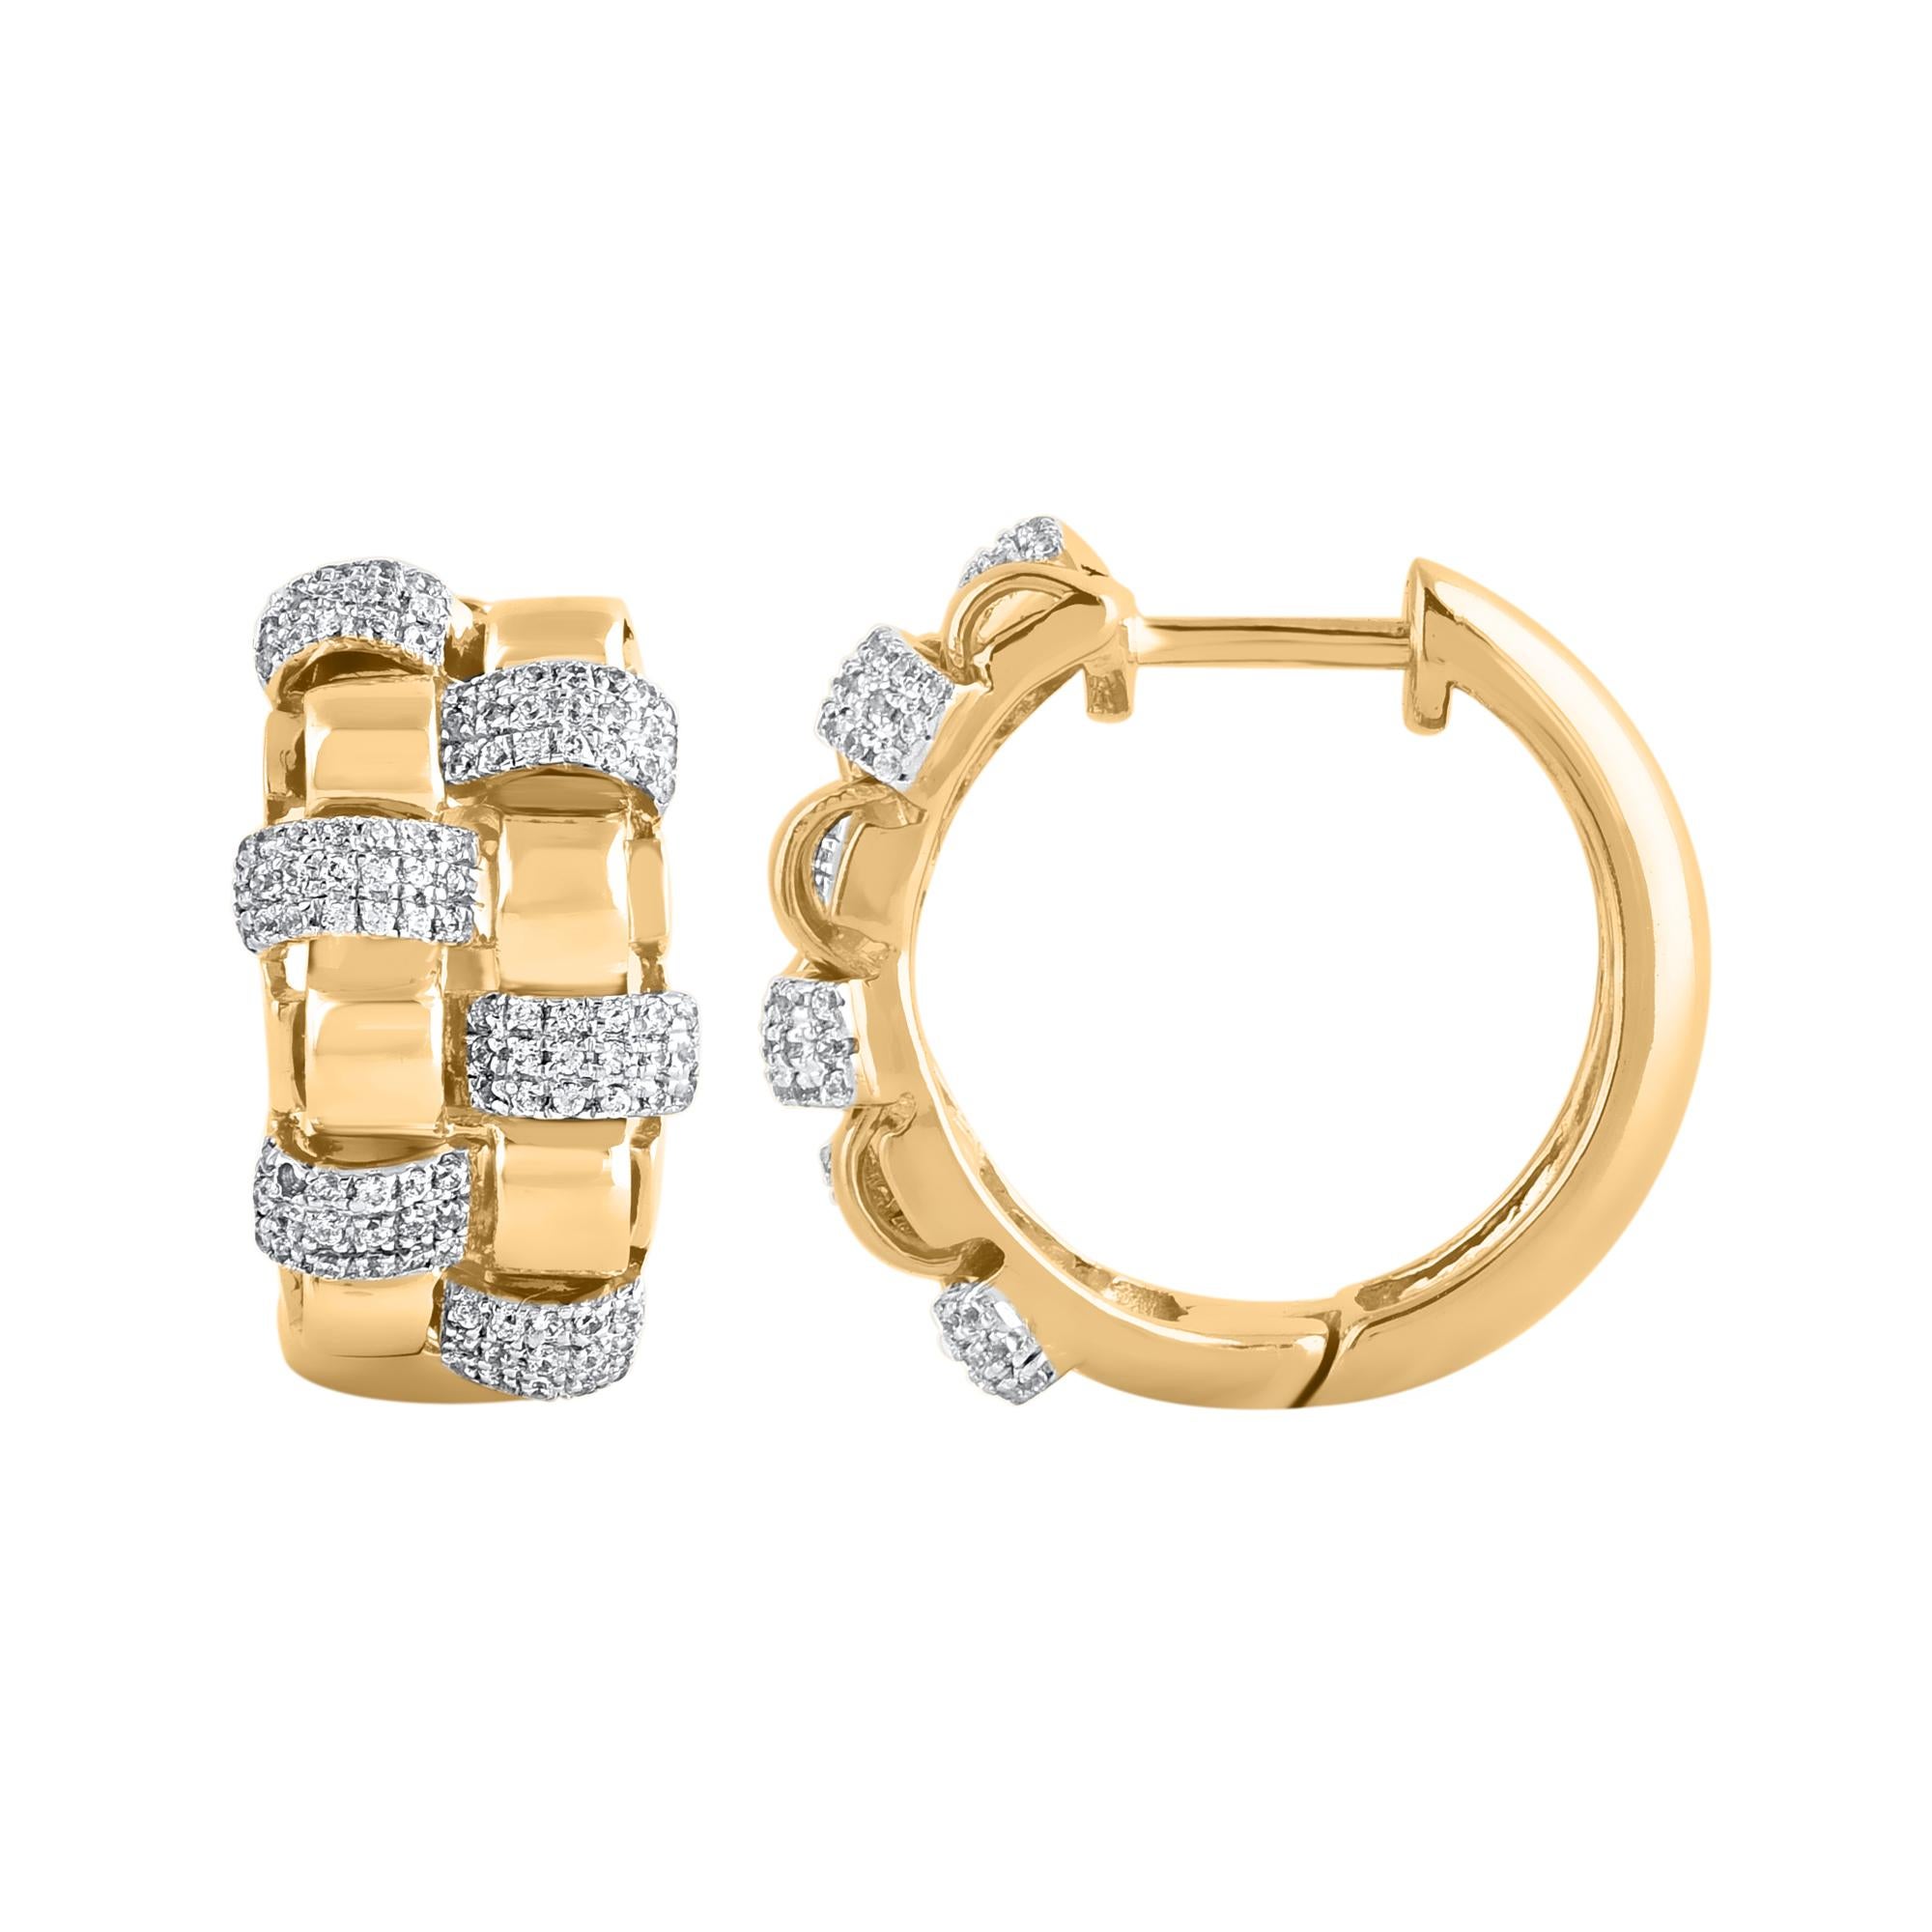 Perfect for daily wear, these diamond huggie hoop earrings are designed to delight. Crafted in 18 karat yellow gold with 216 single cut round diamond in prong setting. Total diamond weight is 0.50 carat. These earrings secure with hinged back. The